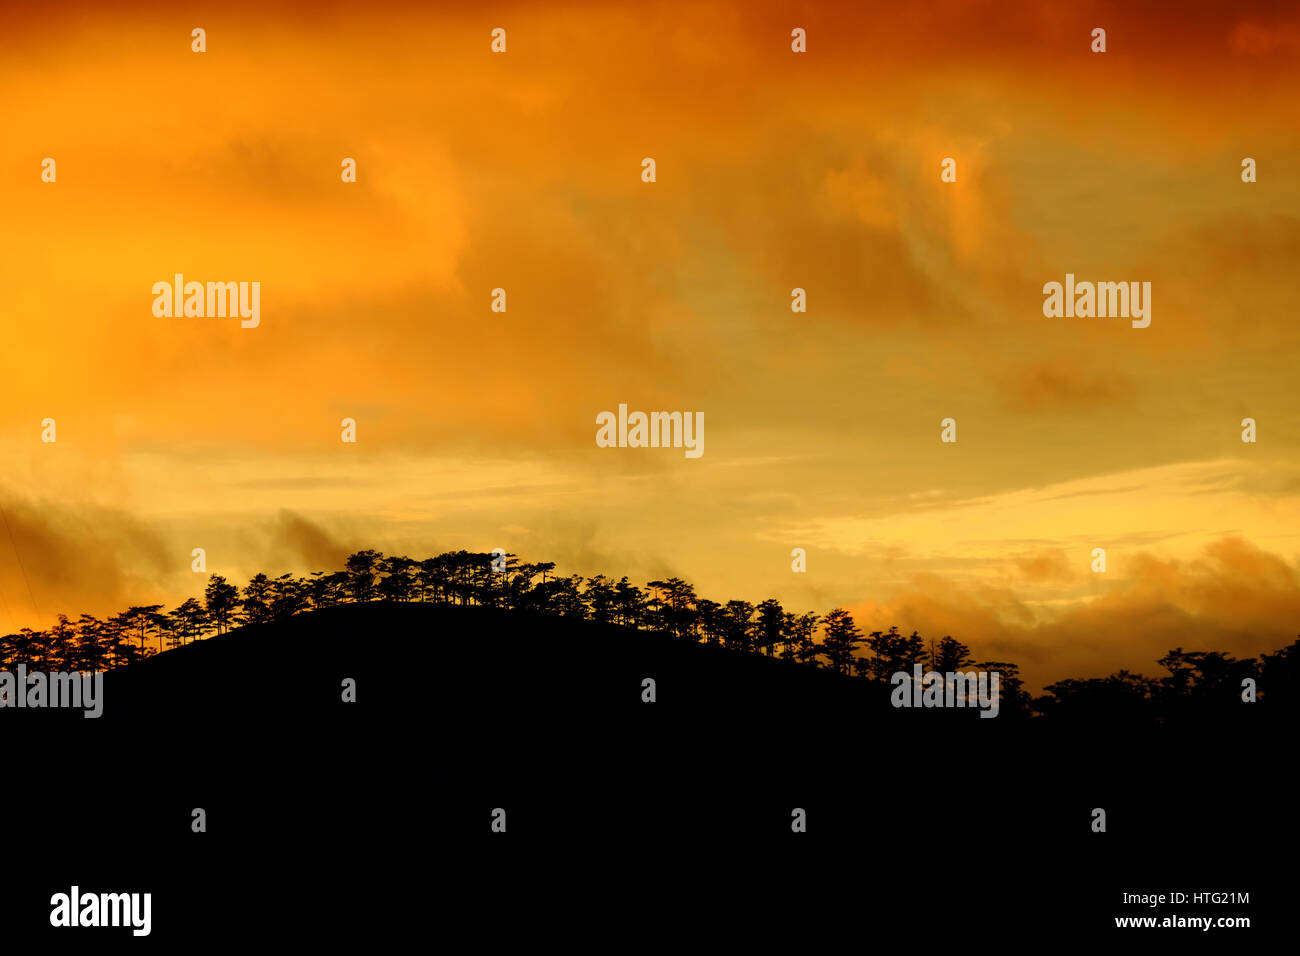 Amazing landscape of Dalat countryside in sunset, vibrant yellow sky with silhouette of row of trees make wonderful scene for Vietnam travel Stock Photo